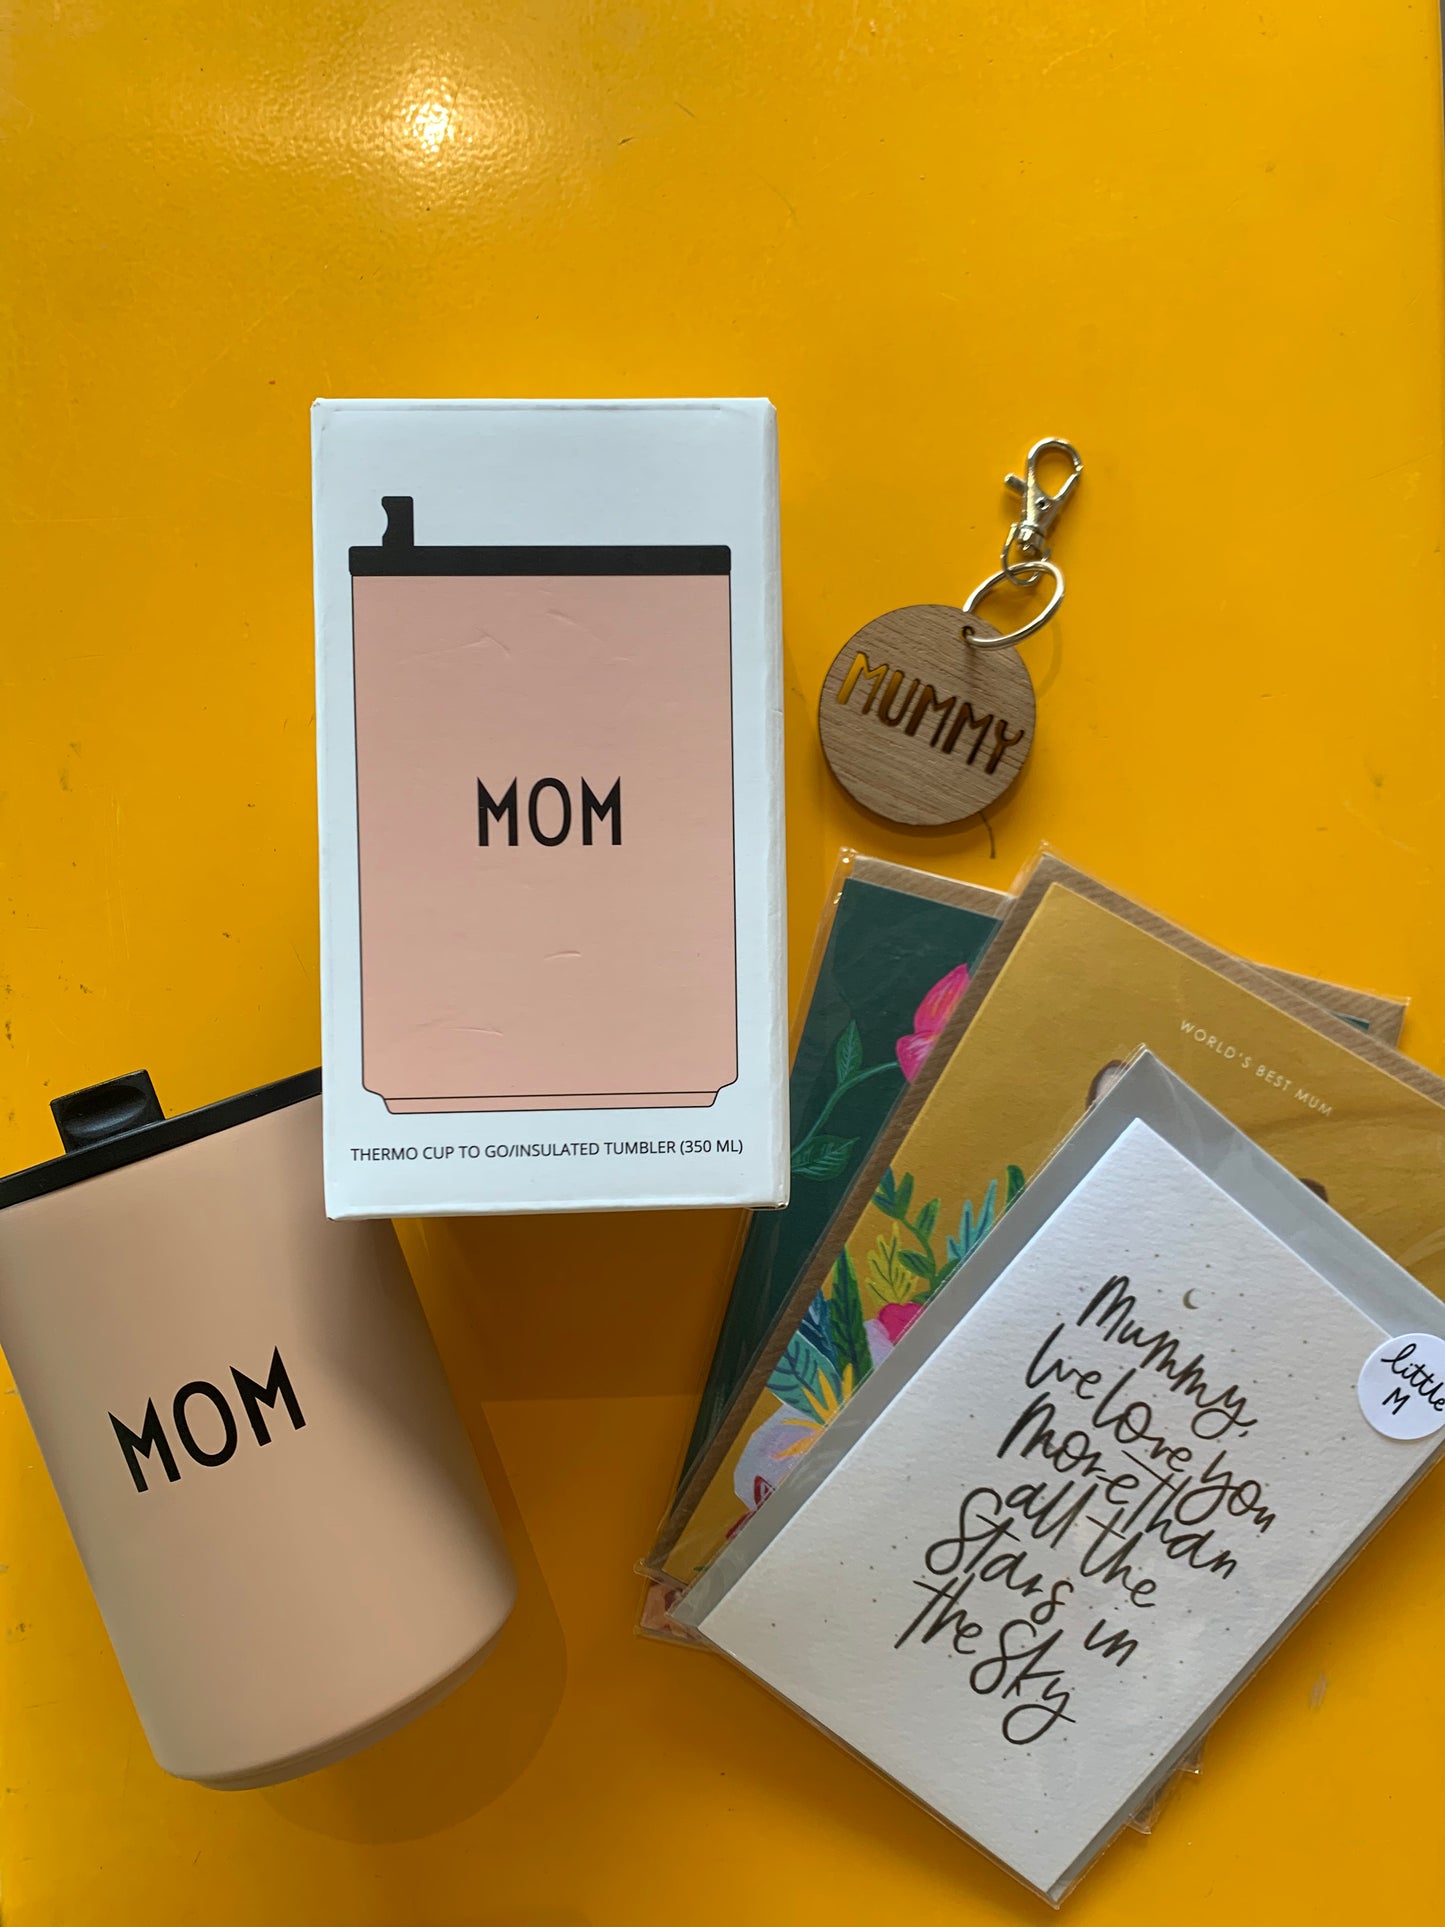 The “Hot Mummy” Gift Set-Thermo Mug, Mummy Key Ring and choice of Greetings Card is available from Nottinghamshire Independent Children’s Store Alf & Co